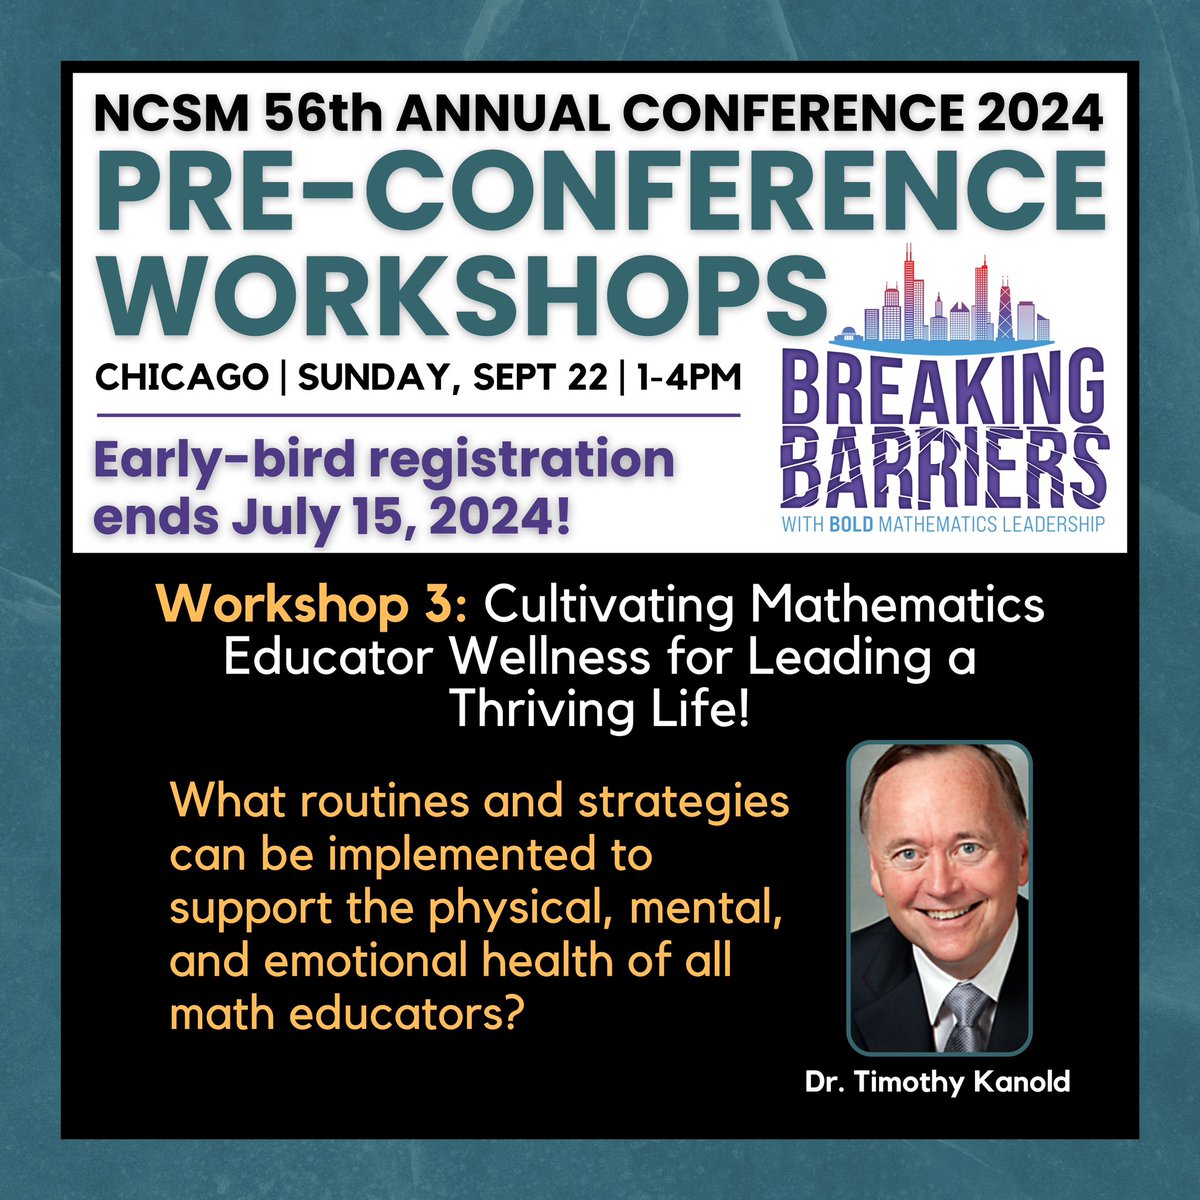 Pre-Conference Workshops at the NCSM 56th Annual Conference 2024 will be held on Sunday, Sept 22. Learn about Workshop 3 with Dr. Timothy Kanold @tkanold at mathedleadership.org/56th-annual-co… Register: mathedleadership.org/56th-annual-co… #NCSMBOLD #AnnualConference #ileadmath